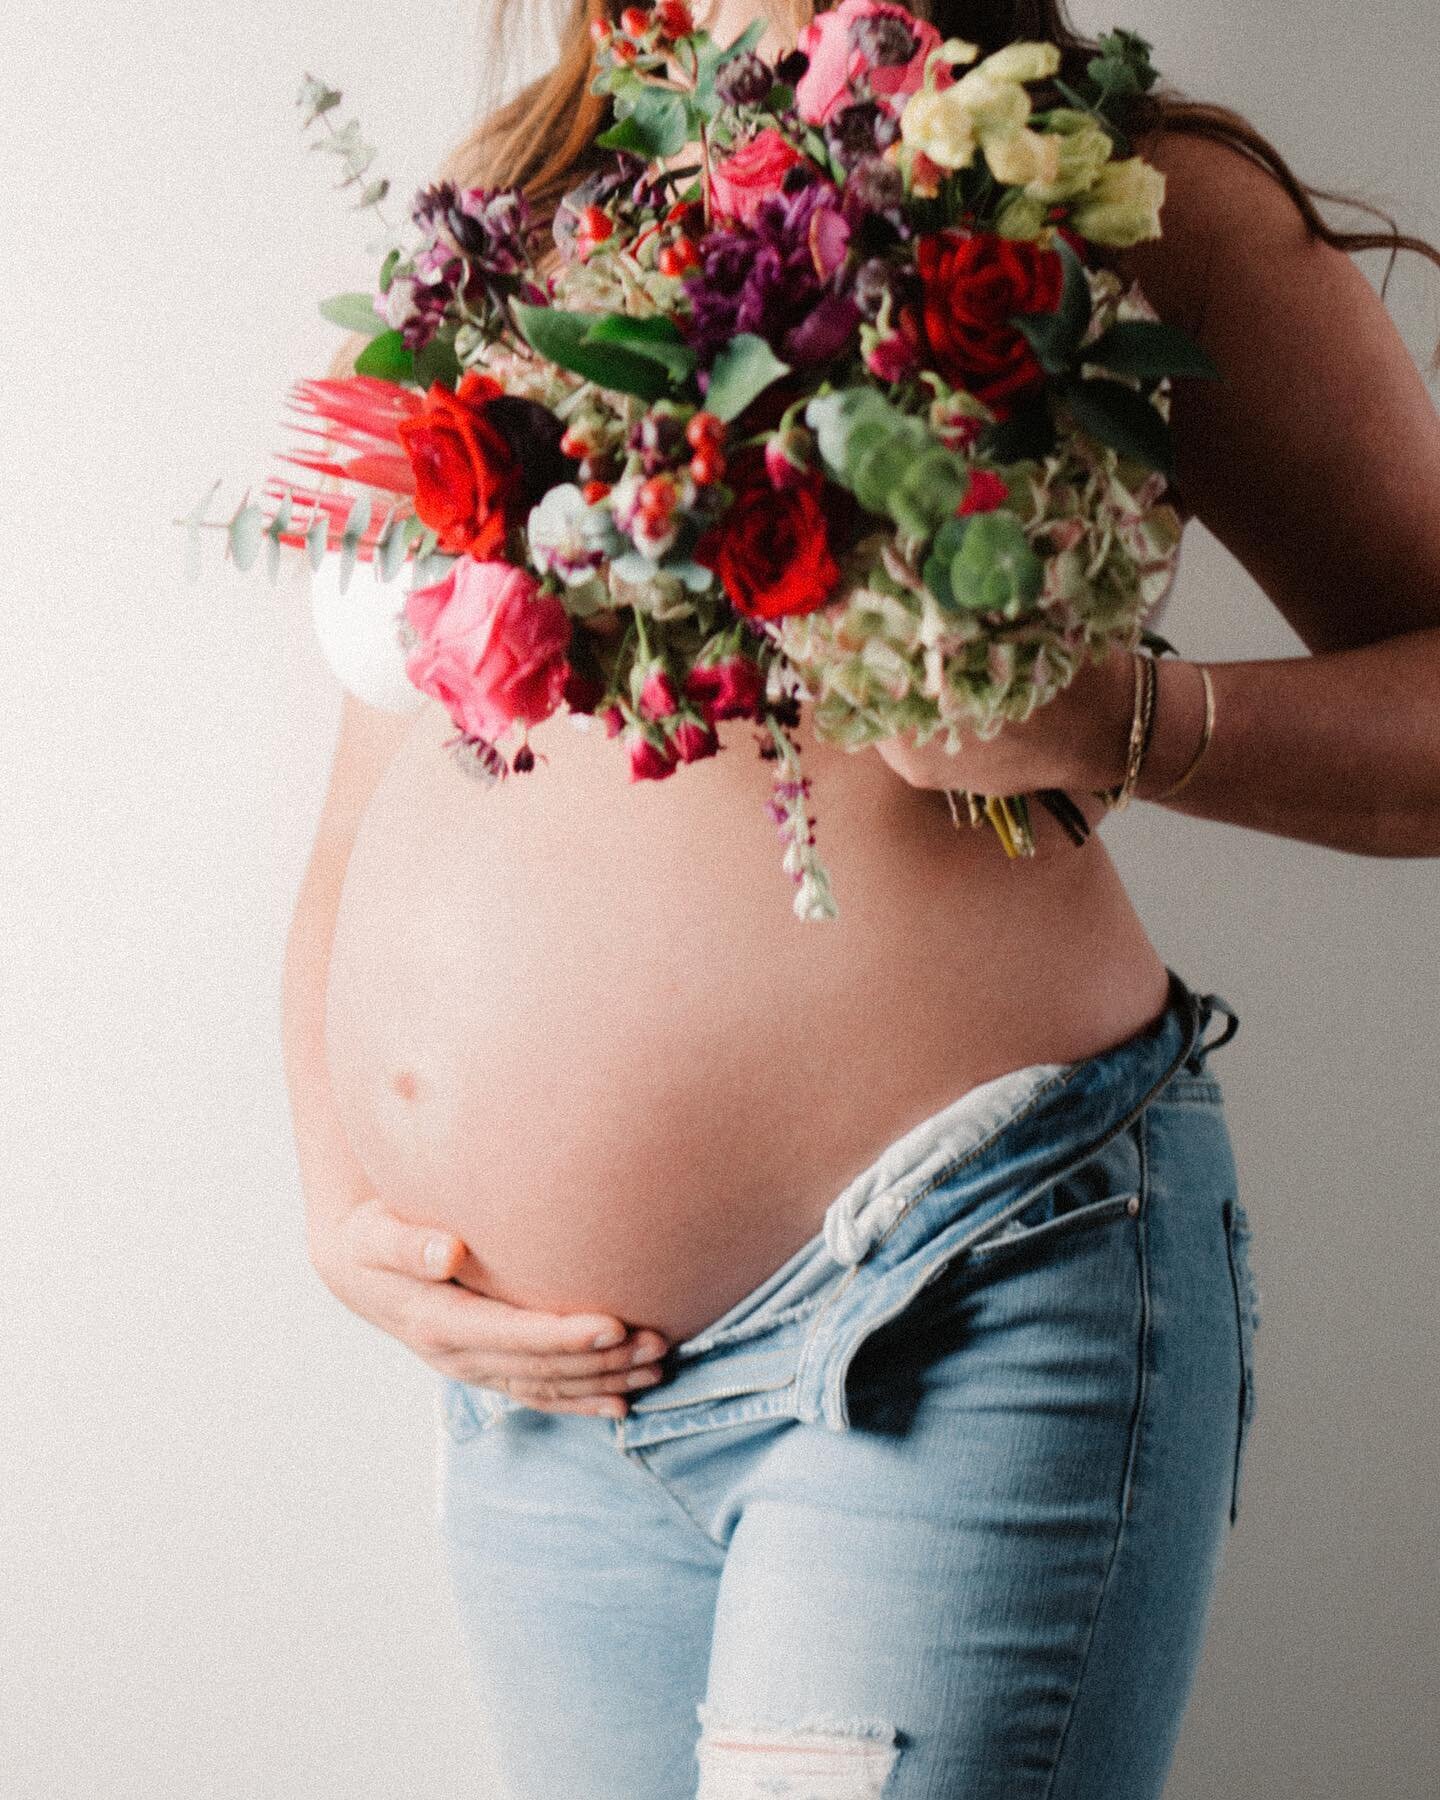 Can&rsquo;t believe this is a year ago already! 😍
Maternity shoot Kate | June 2022